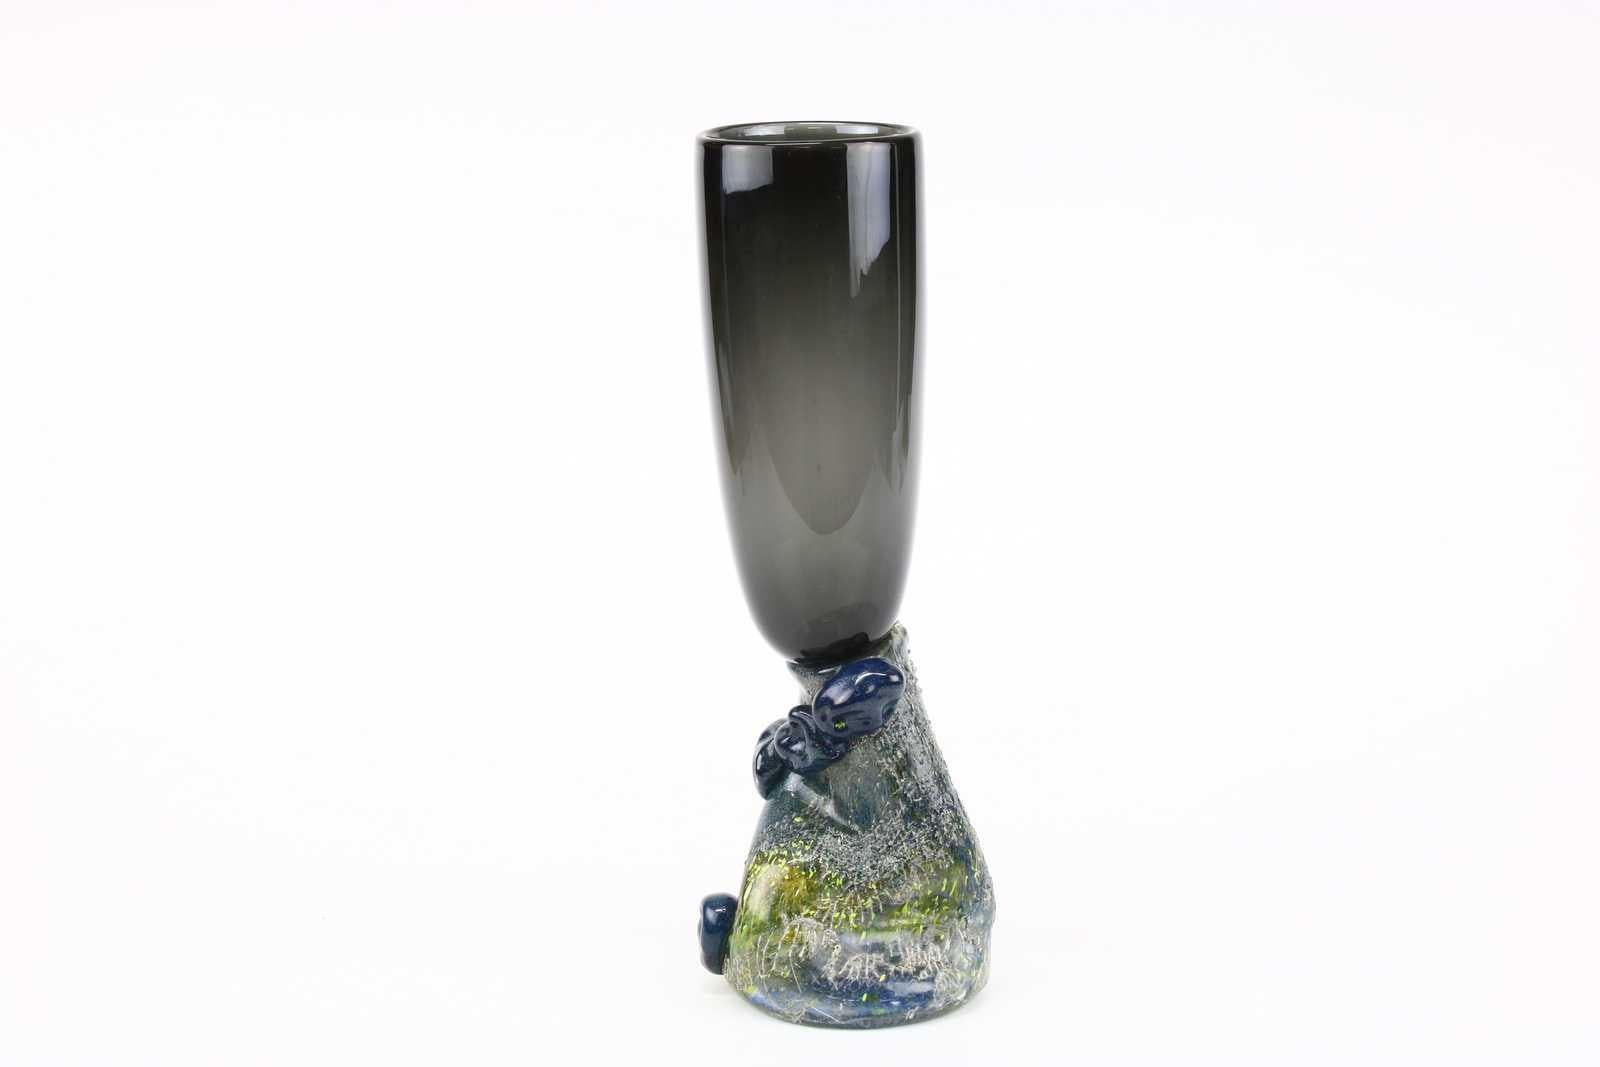 Vesuvius Transcontinental, a unique art glass vase by the Swedish glass artist Björn Stern, crafted in the year 1989. This captivating vase is more than just a glassware; it's a journey through time and imagination. 

The name 